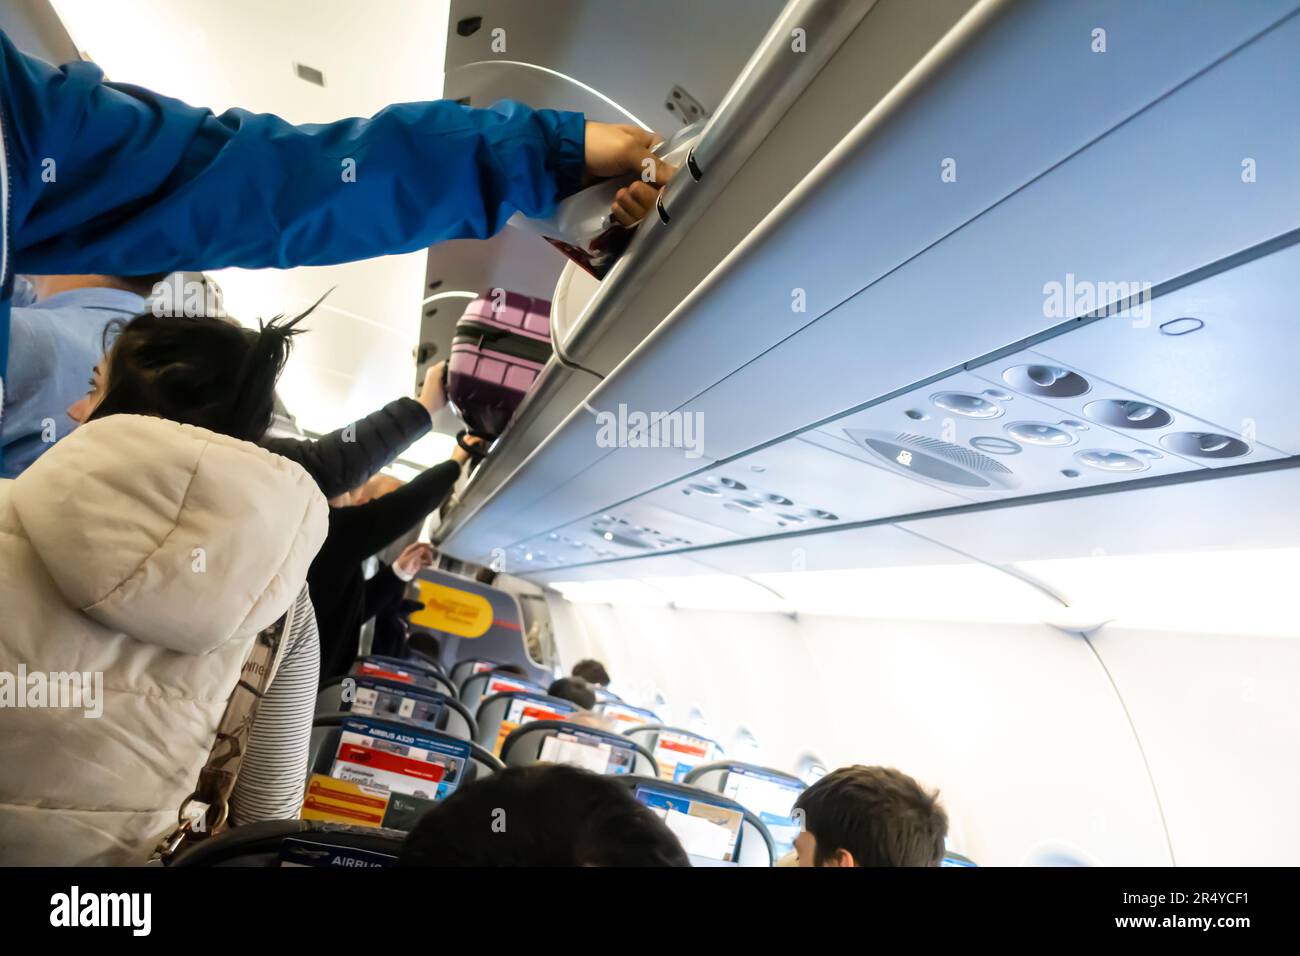 Passengers taking carry-on luggage from the overhead buggage space inside Airbus A320 airplane Stock Photo